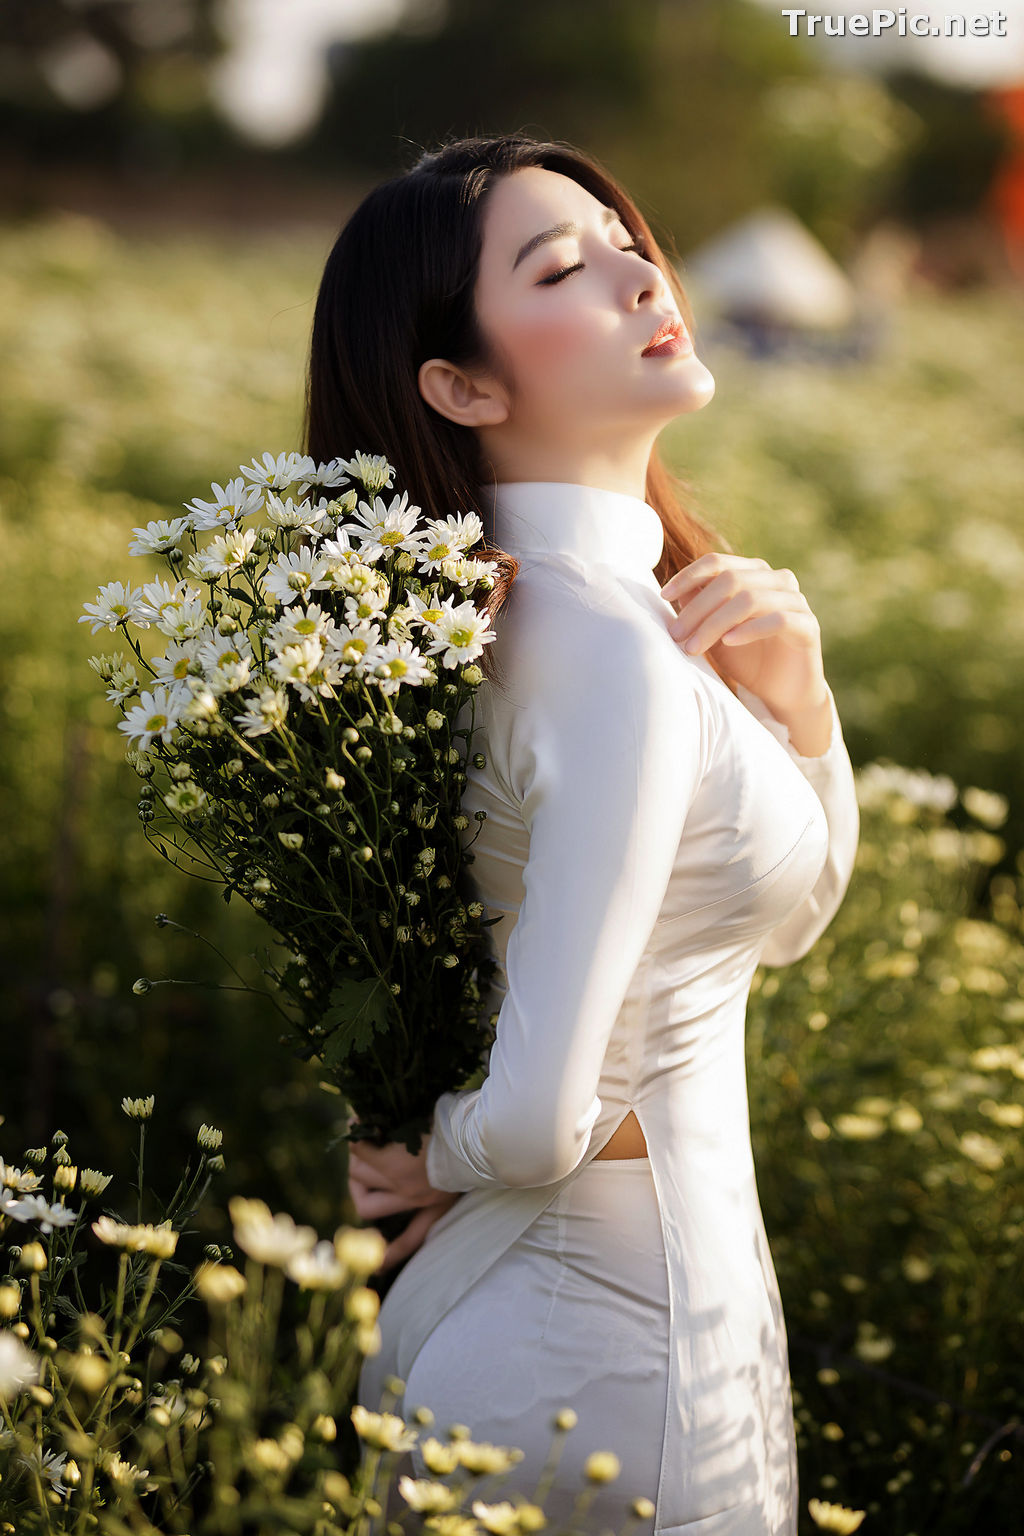 True Pic The Beauty Of Vietnamese Girls With Traditional Dress Ao Dai 5 